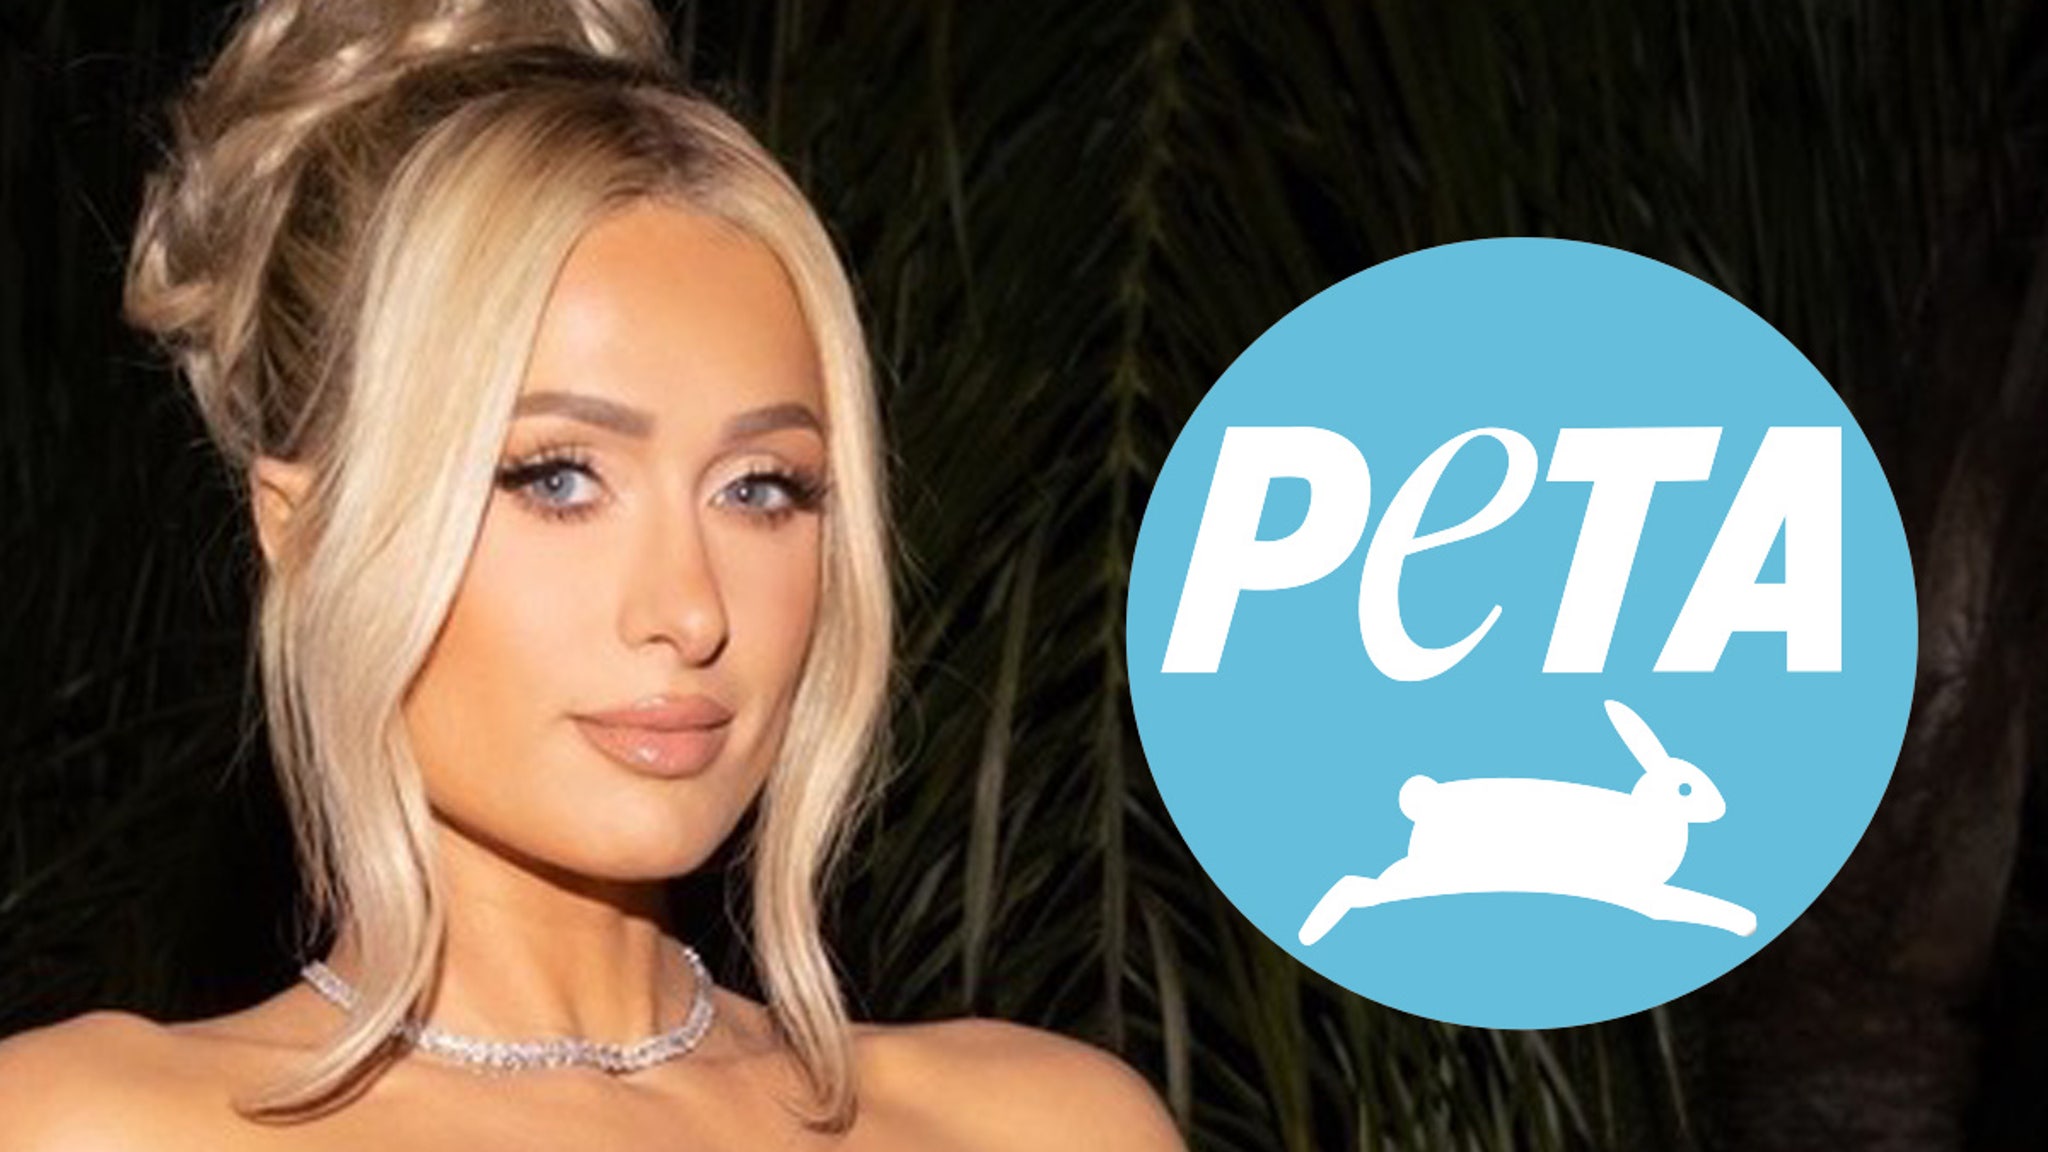 Paris Hilton Called Out By PETA For Not Adopting New Puppy